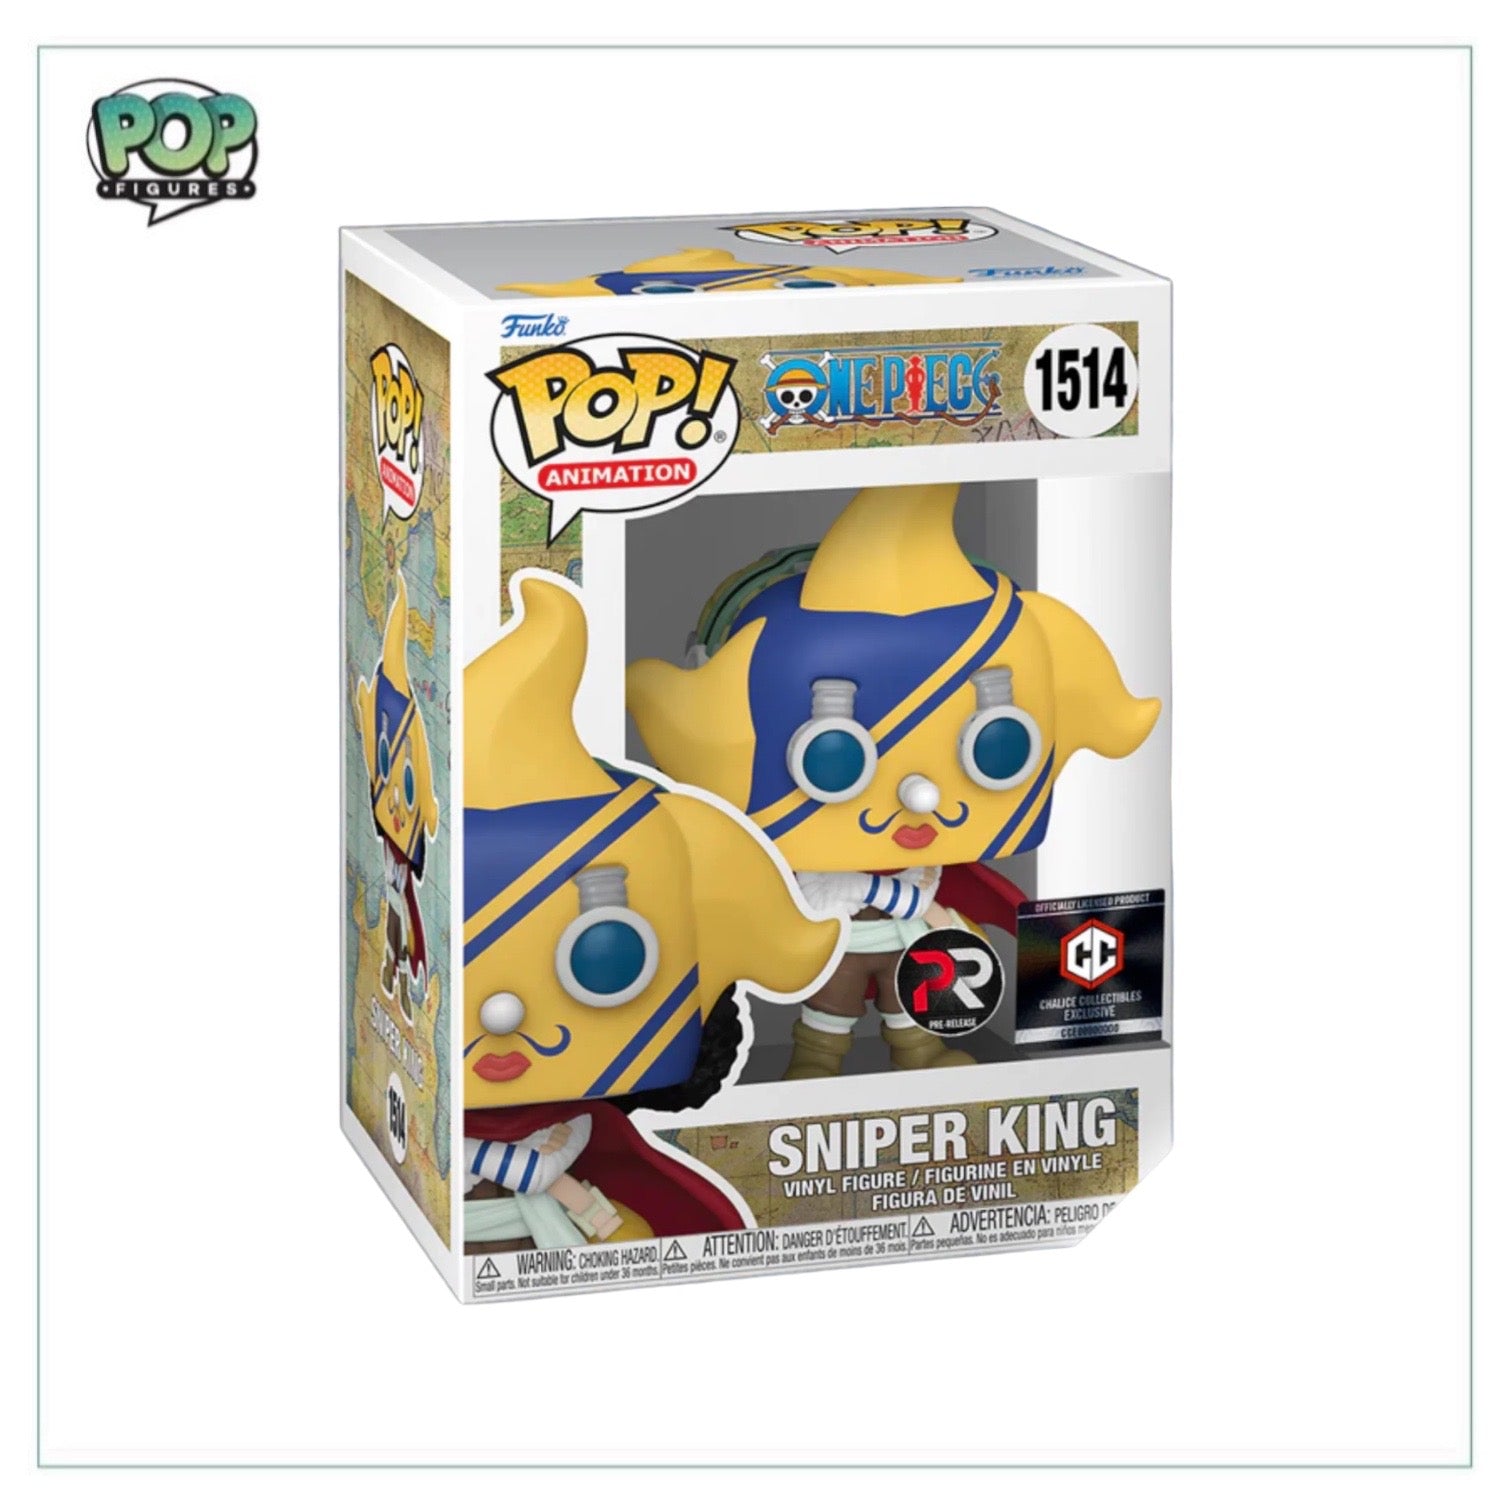 Sniper King #1514 Funko Pop! - One Piece - Chalice Collectibles Pre-Release Exclusive